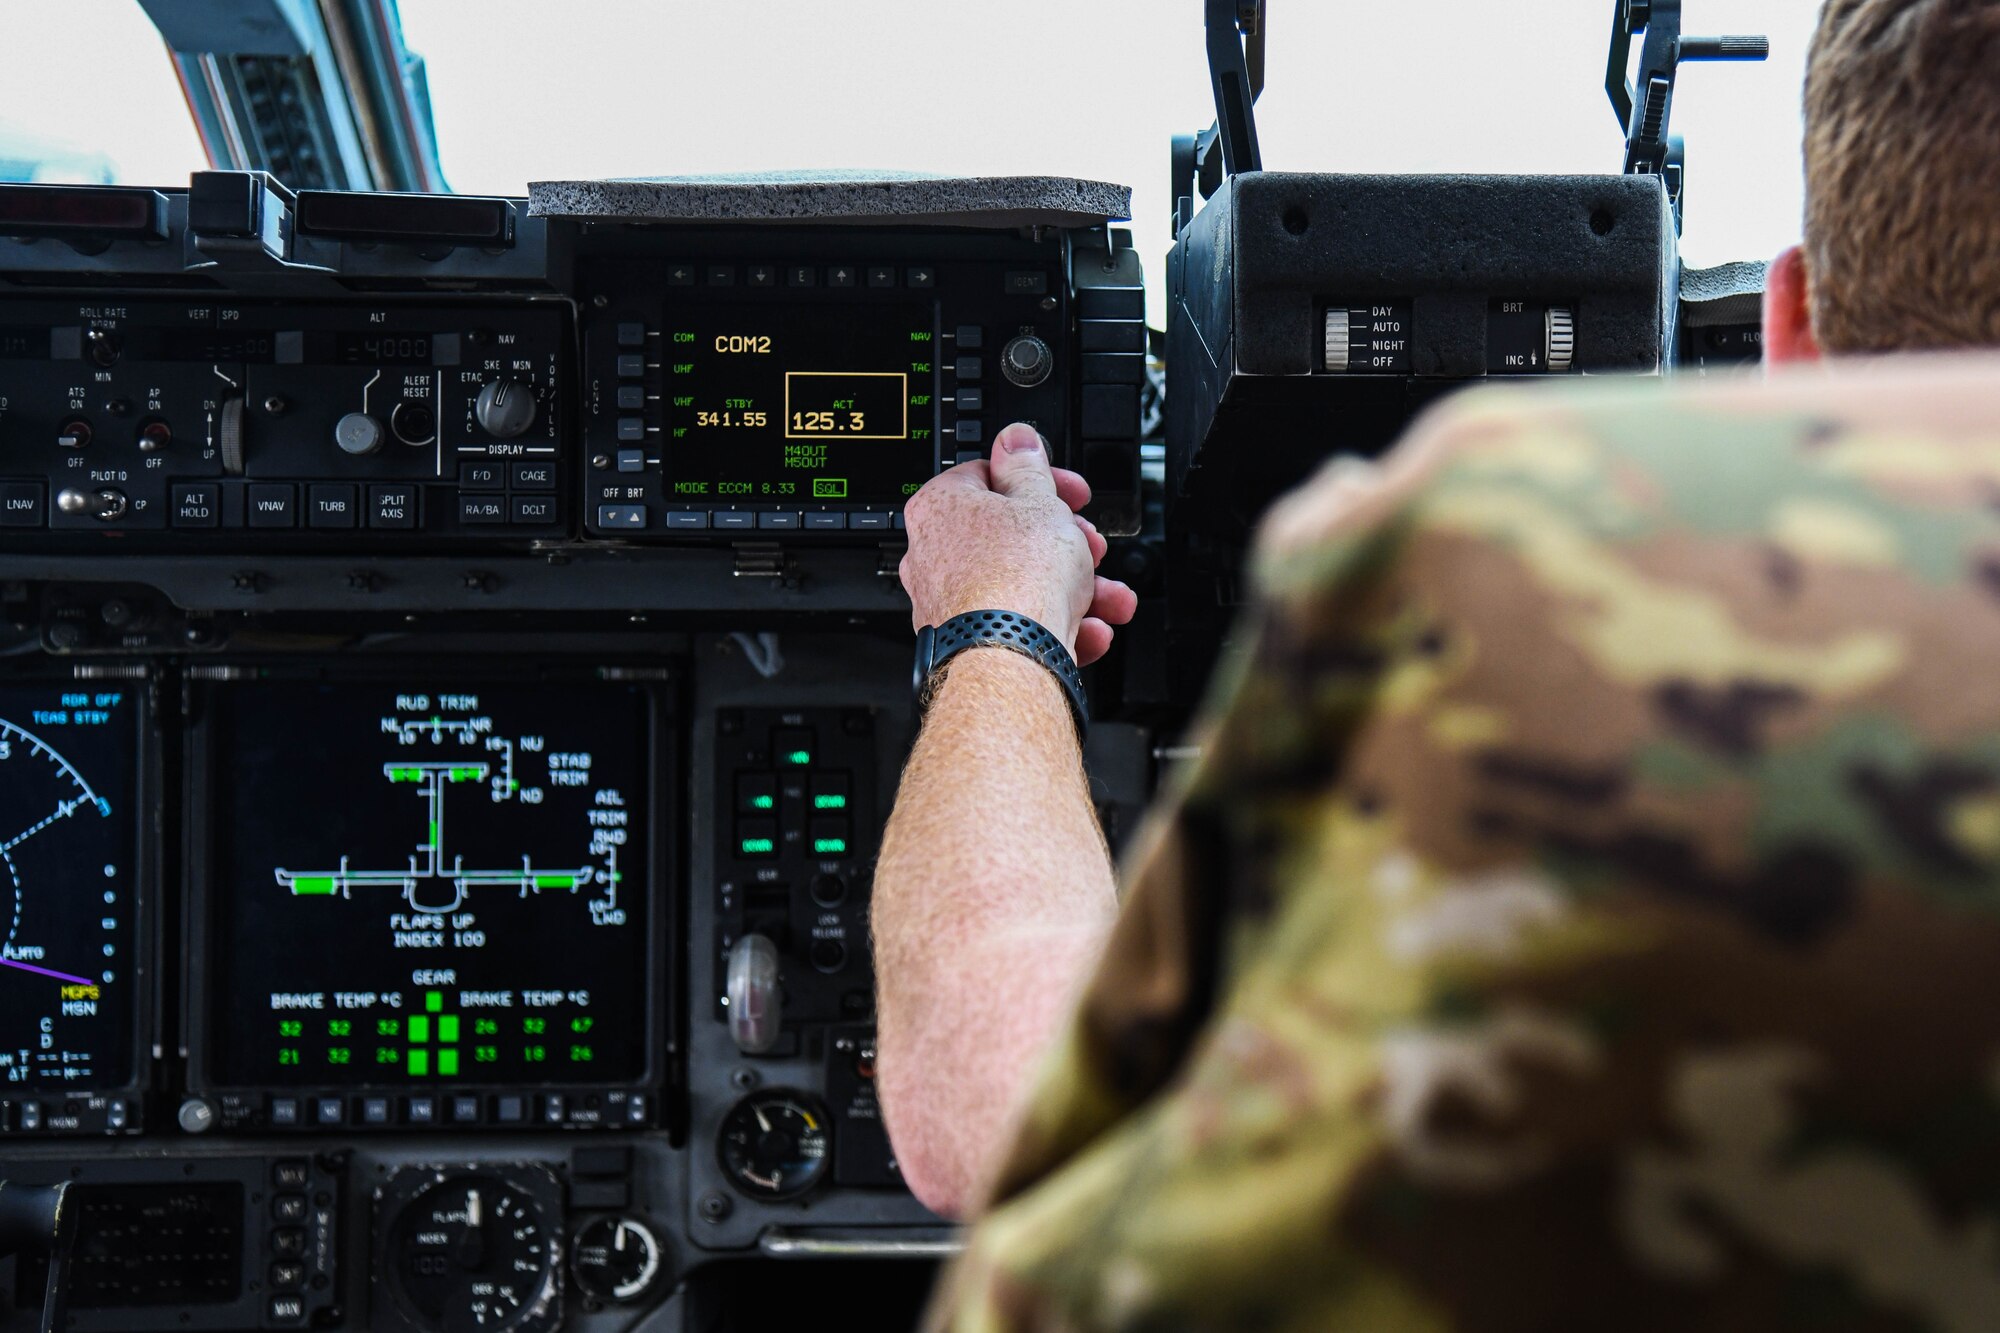 A U.S. Air Force pilot assigned to the 437th Airlift Wing prepares a C-17 Globemaster III for a flight to deliver cargo and troops to Afghanistan at Joint Base Charleston, S.C.